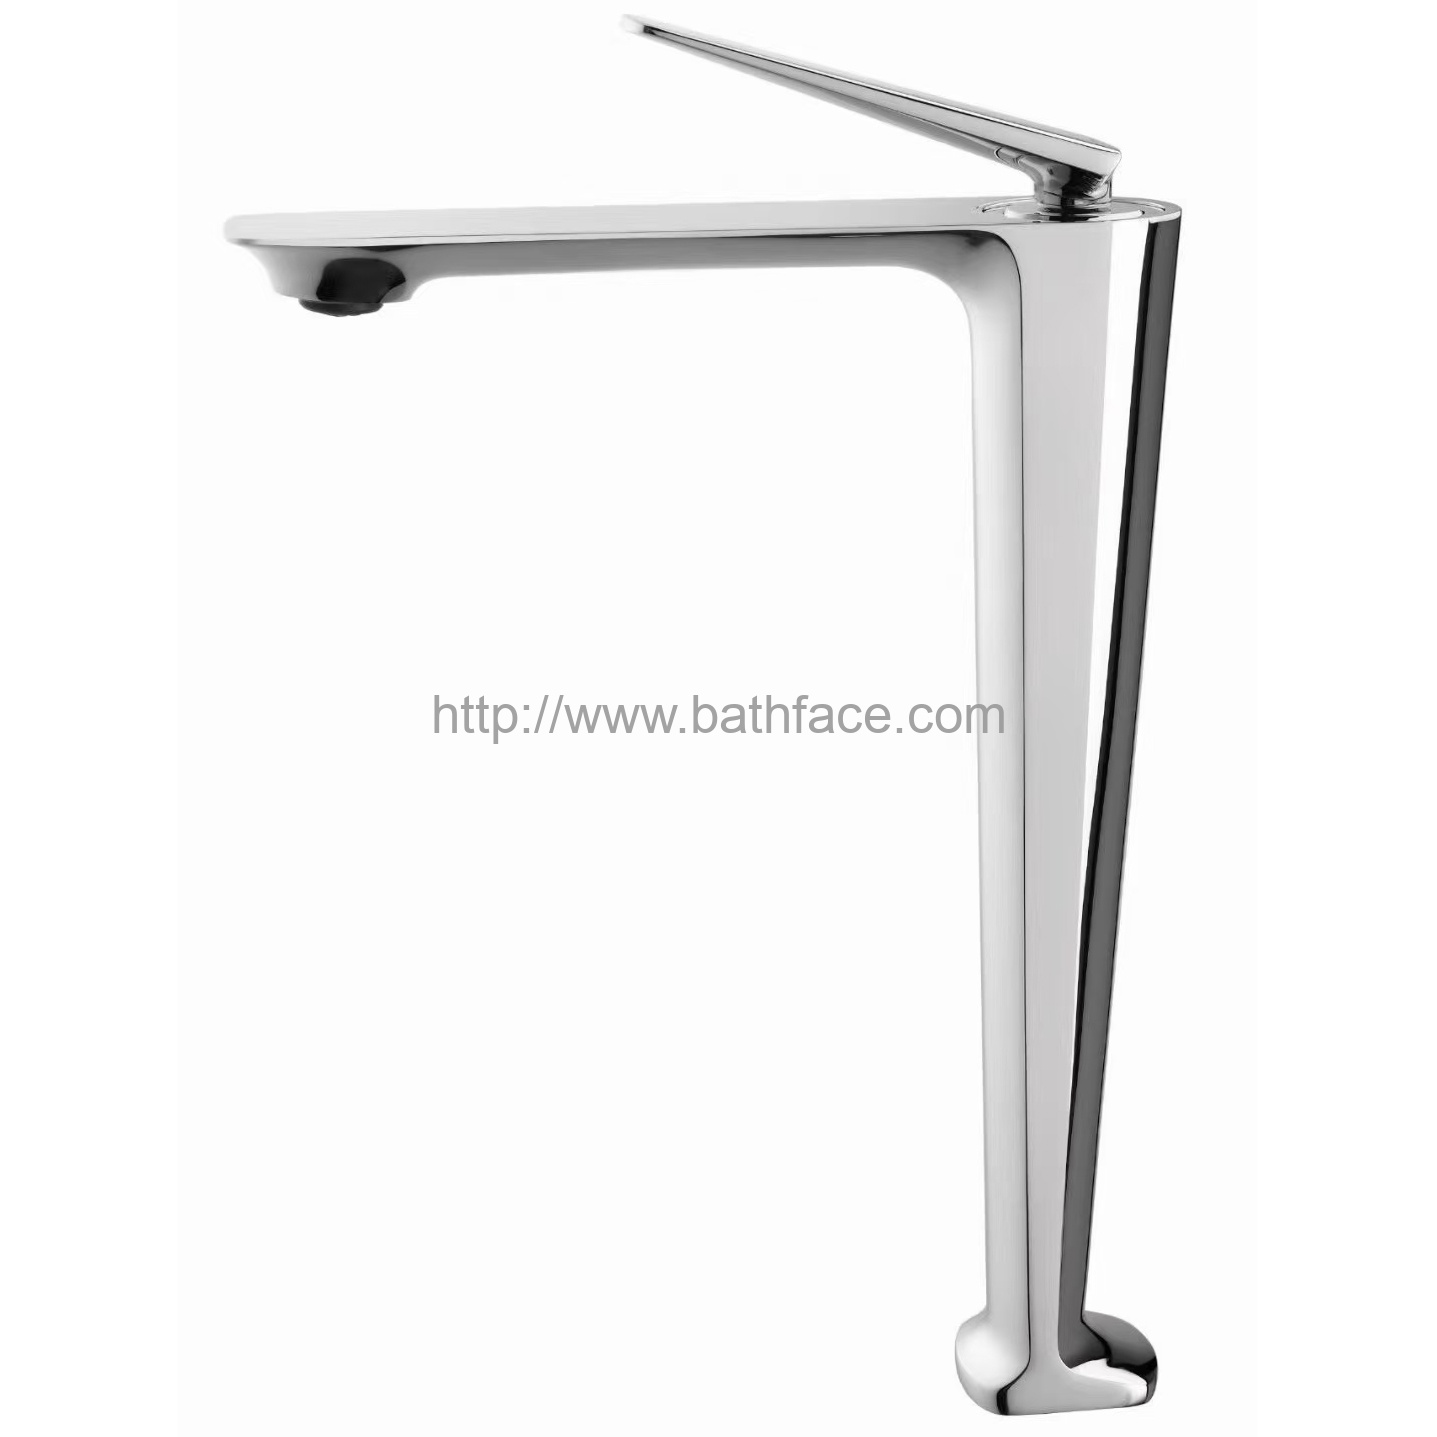 Top Quality Brass Basin Faucet